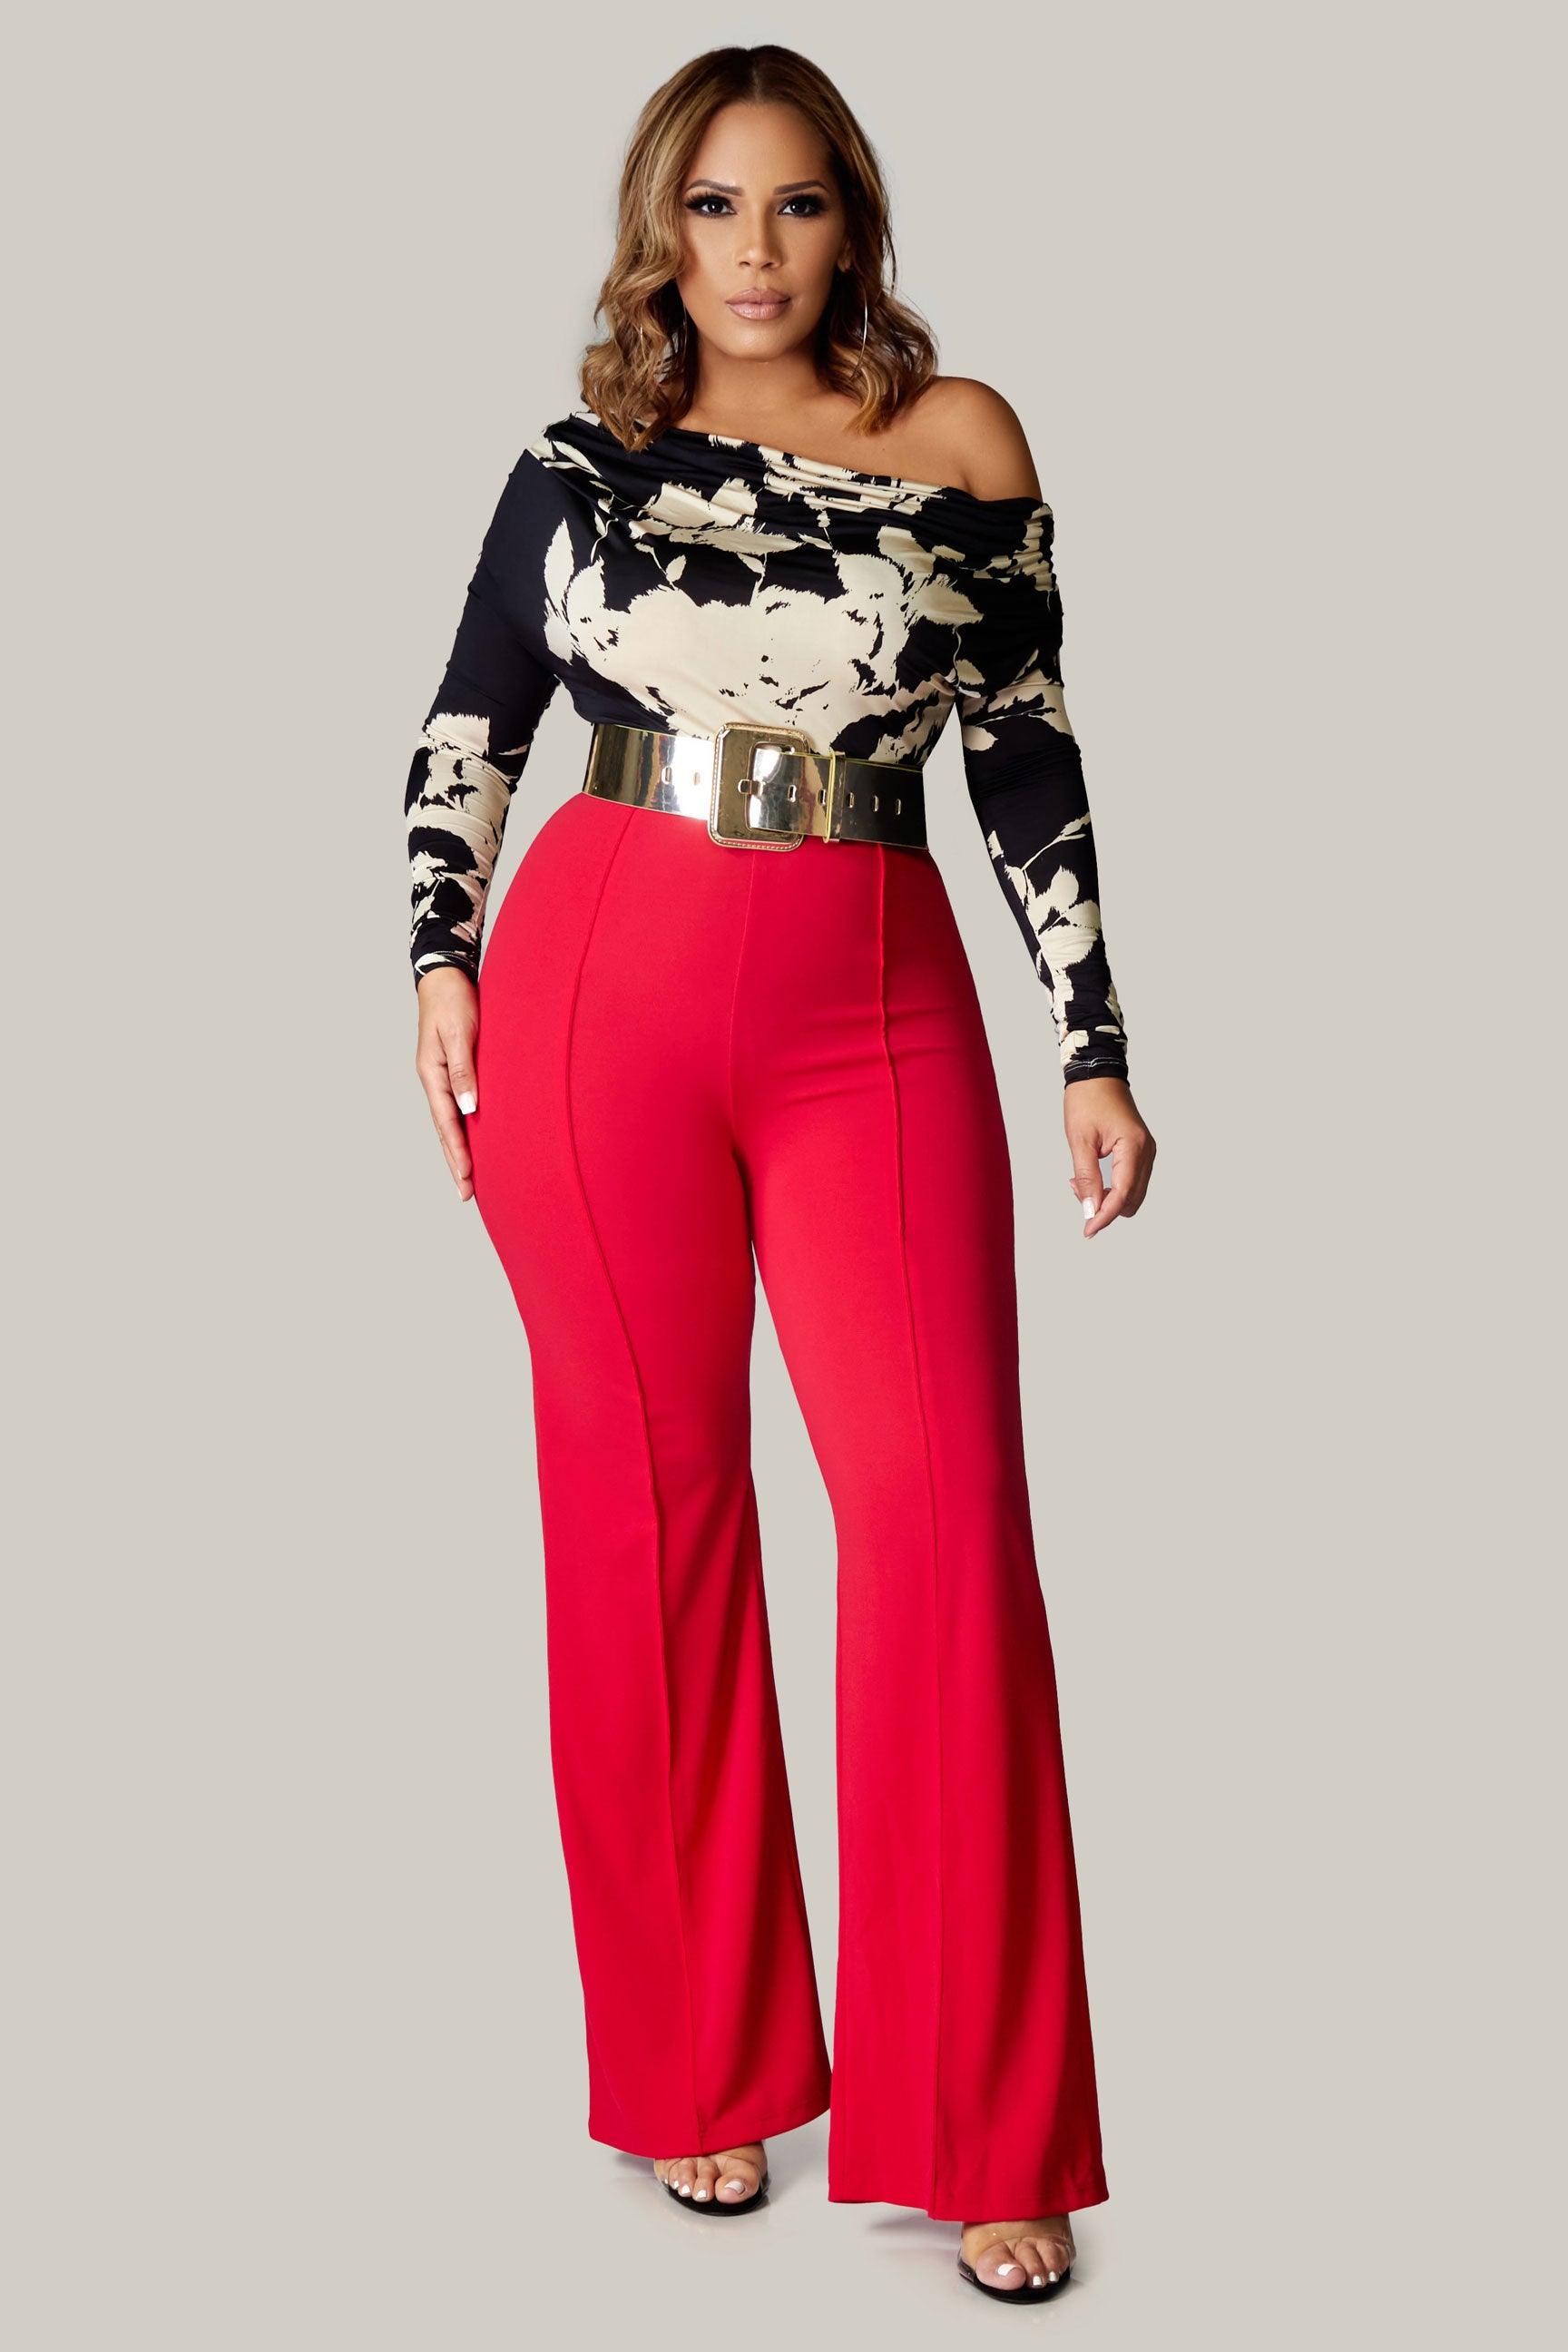 Sheva Crop Top and High Waisted Pants Set - MY SEXY STYLES